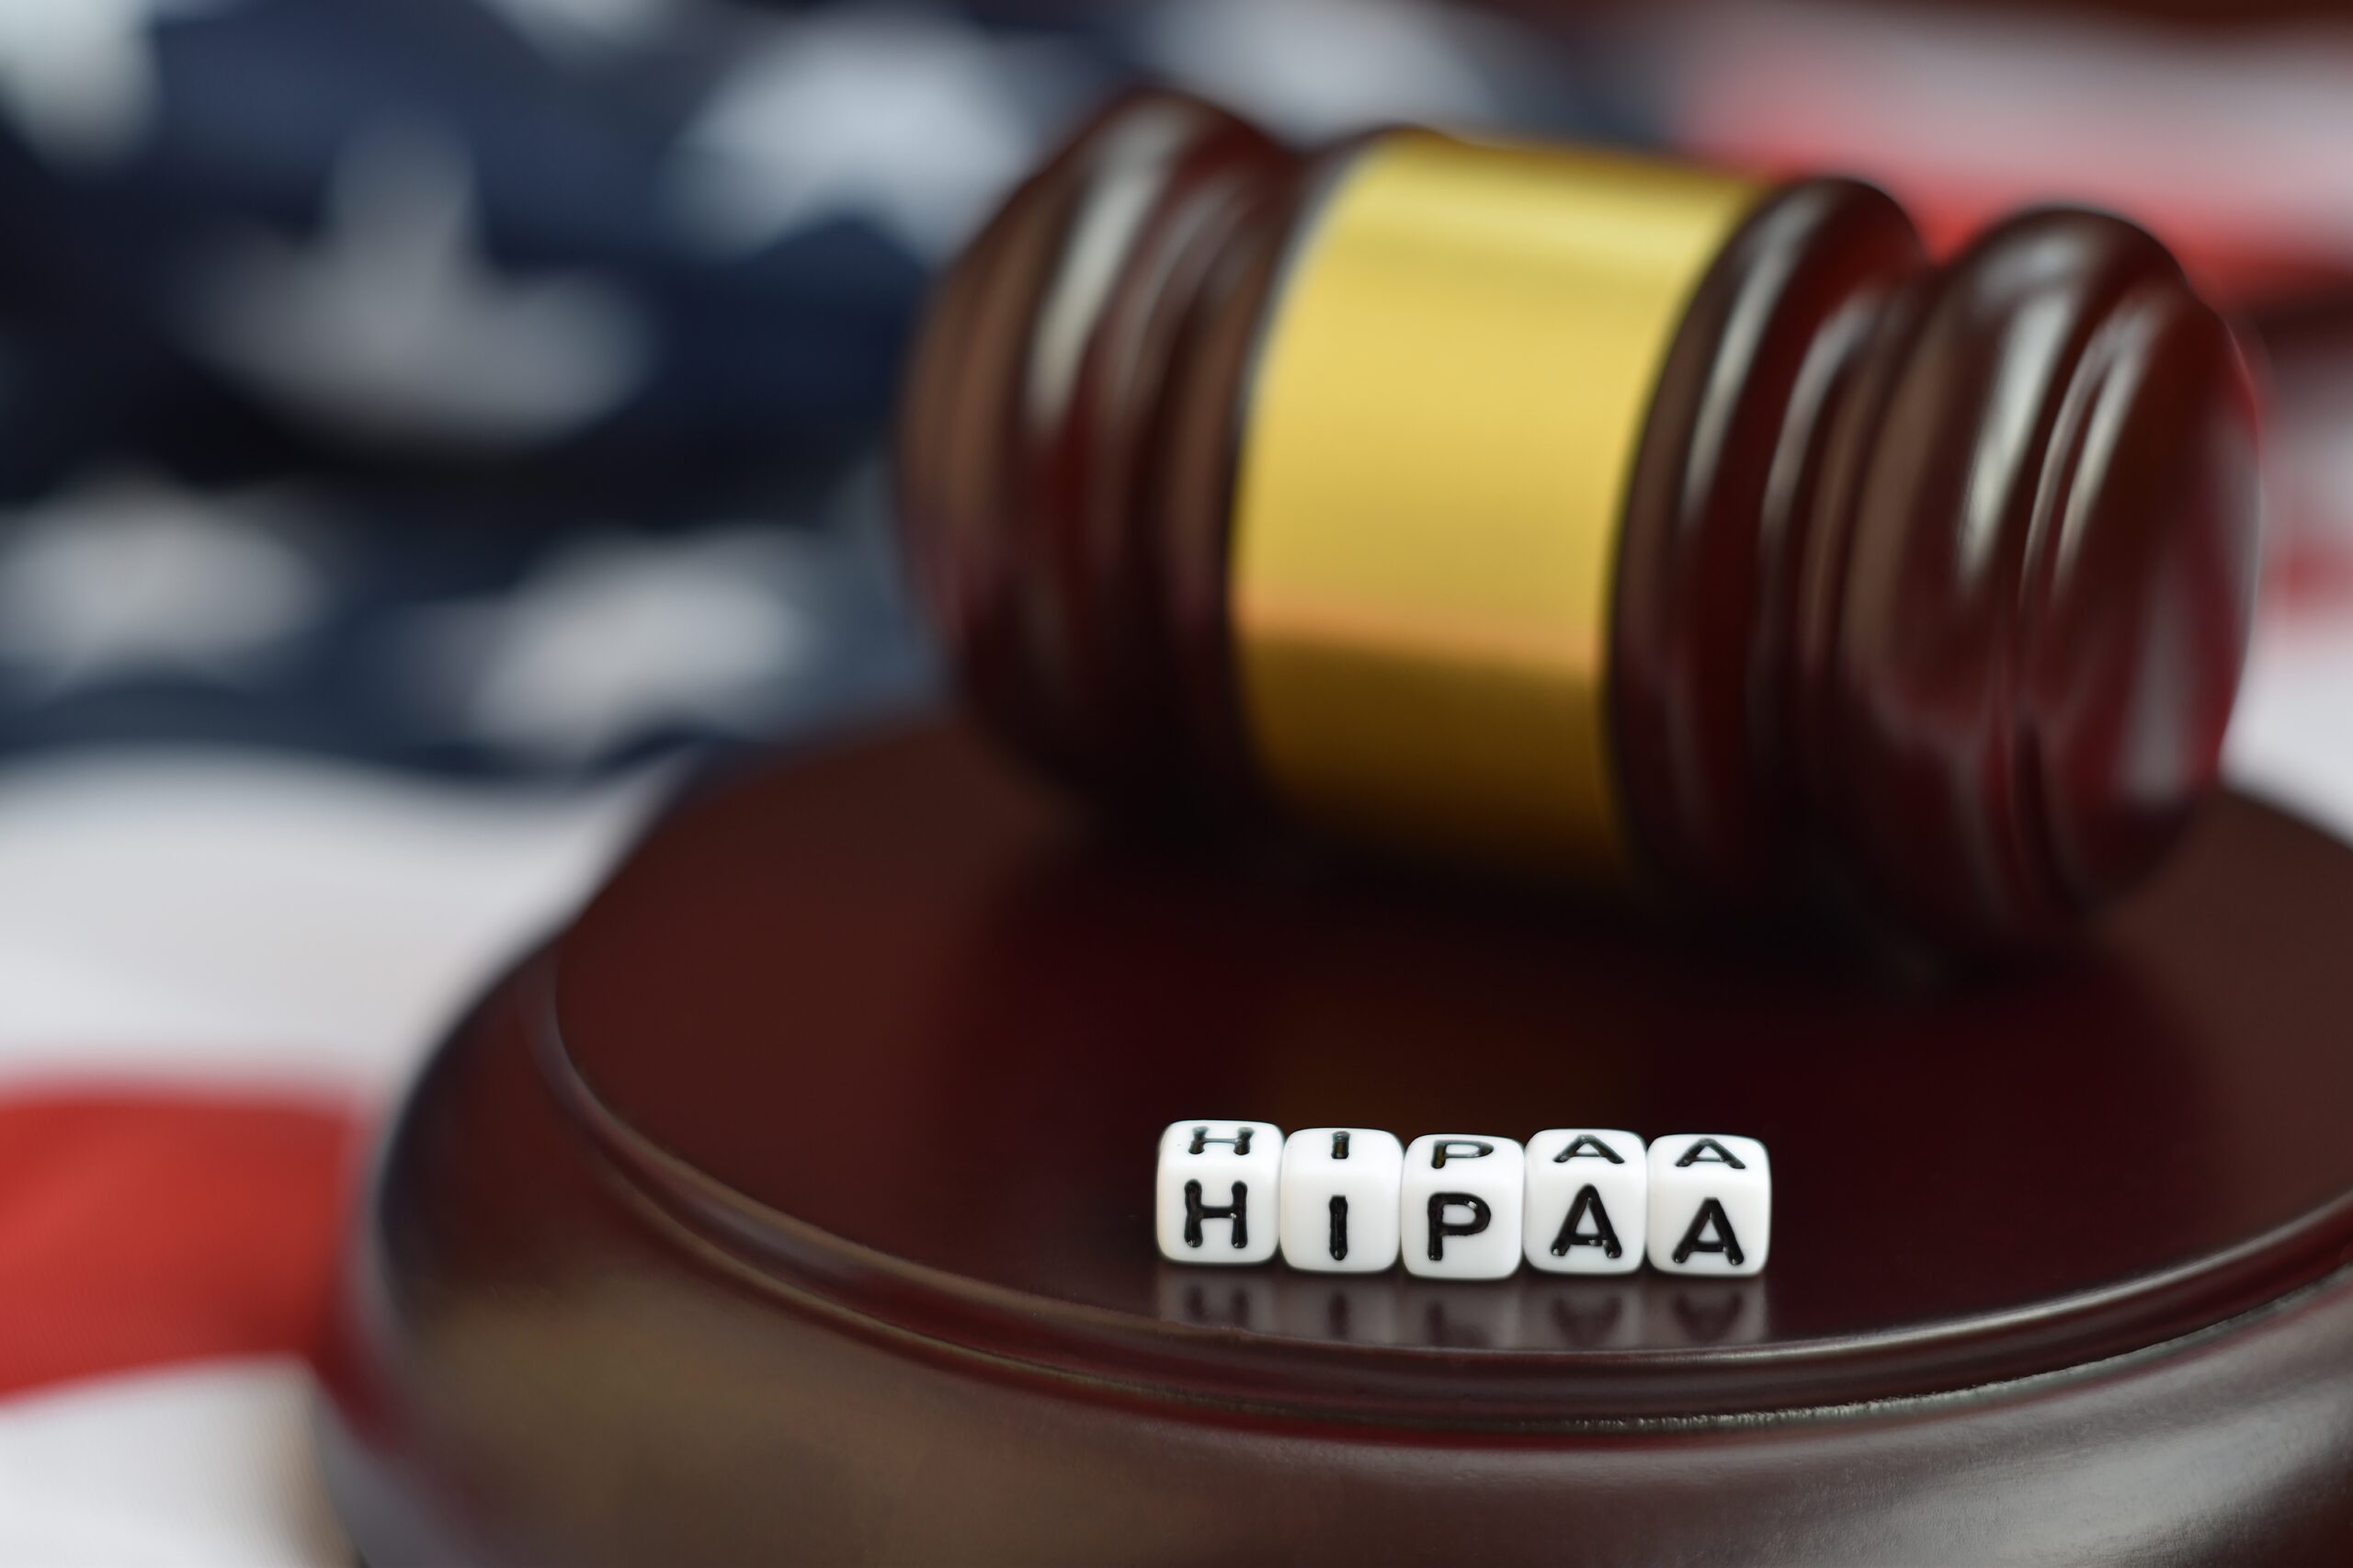 Justice mallet and hipaa acronym